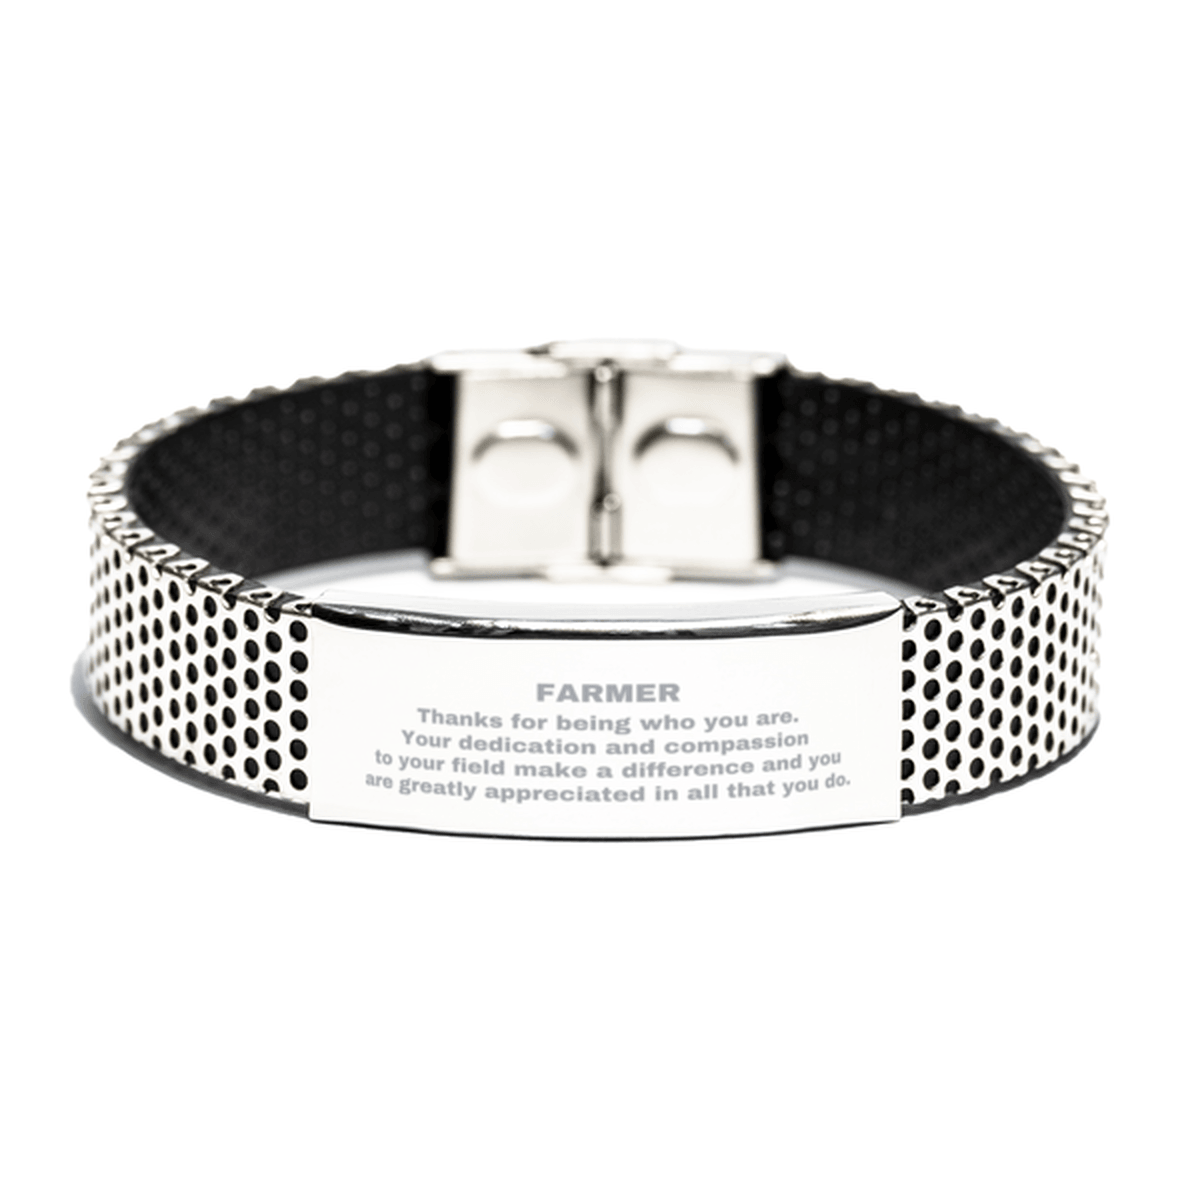 Farmer Silver Shark Mesh Stainless Steel Engraved Bracelet - Thanks for being who you are - Birthday Christmas Jewelry Gifts Coworkers Colleague Boss - Mallard Moon Gift Shop